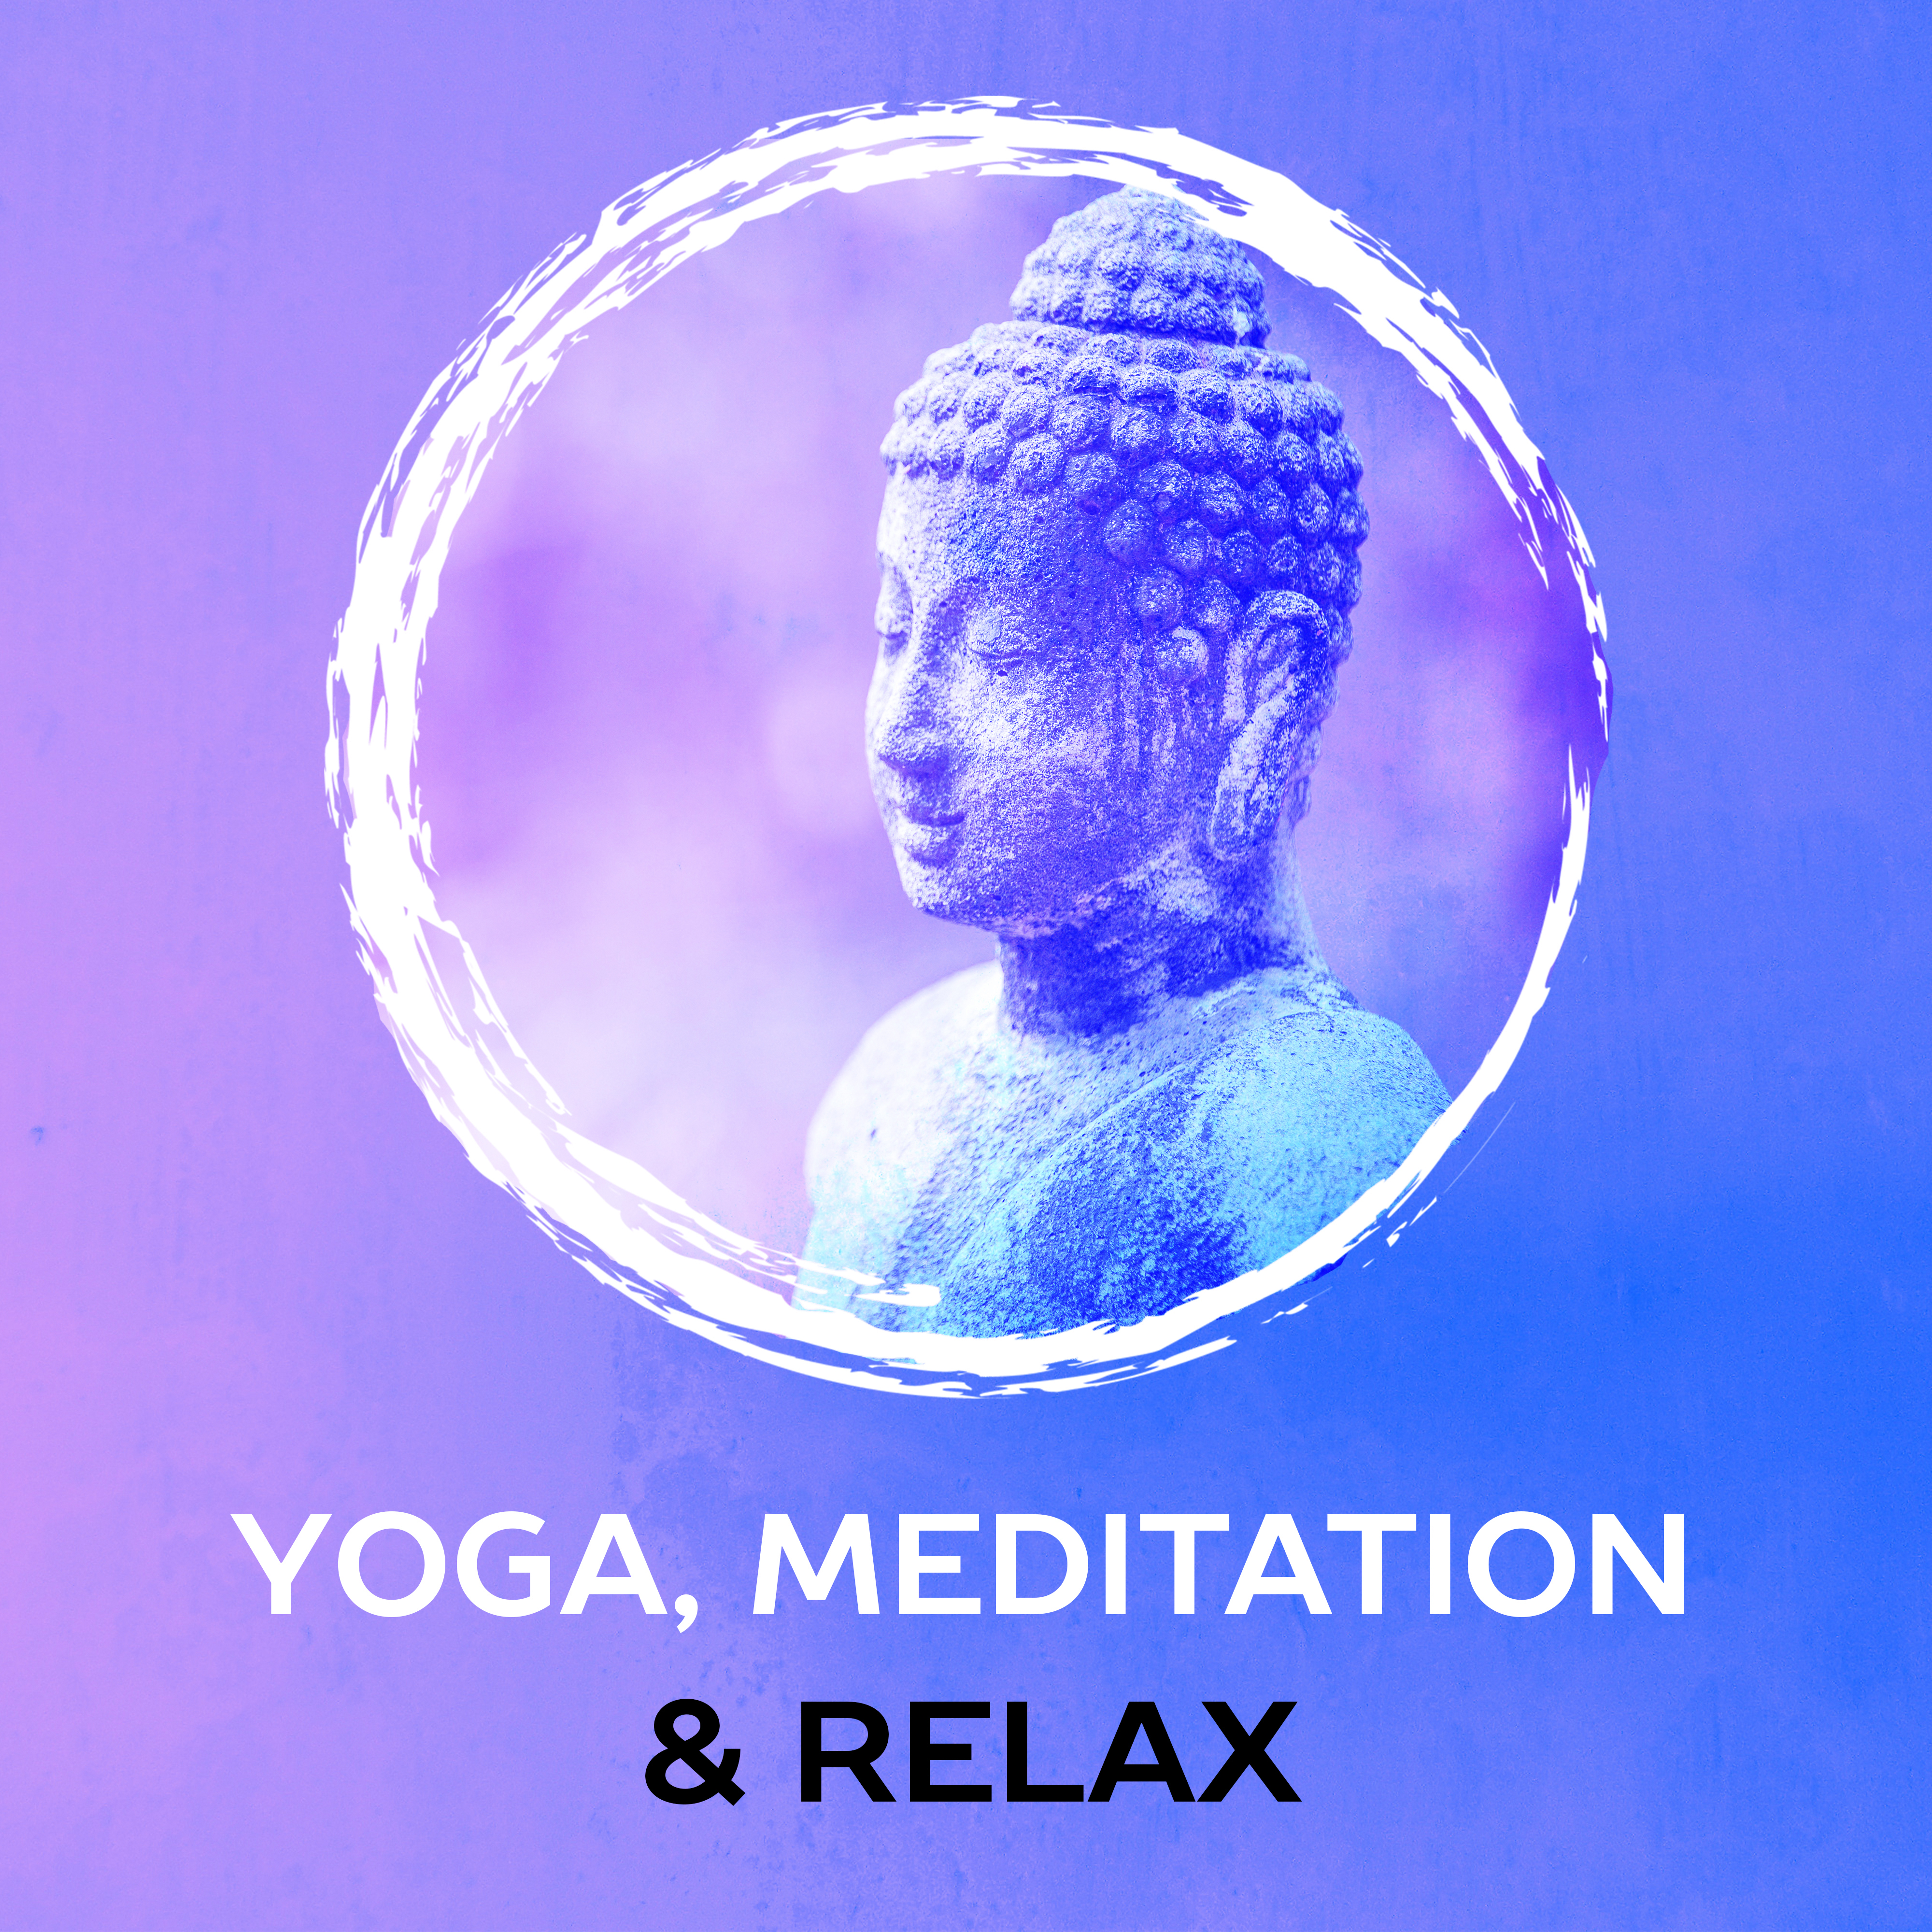 Yoga, Meditation  Relax  15 Soothing Sounds for Deep Meditation, Inner Healing, Harmony, Chakra Relaxation